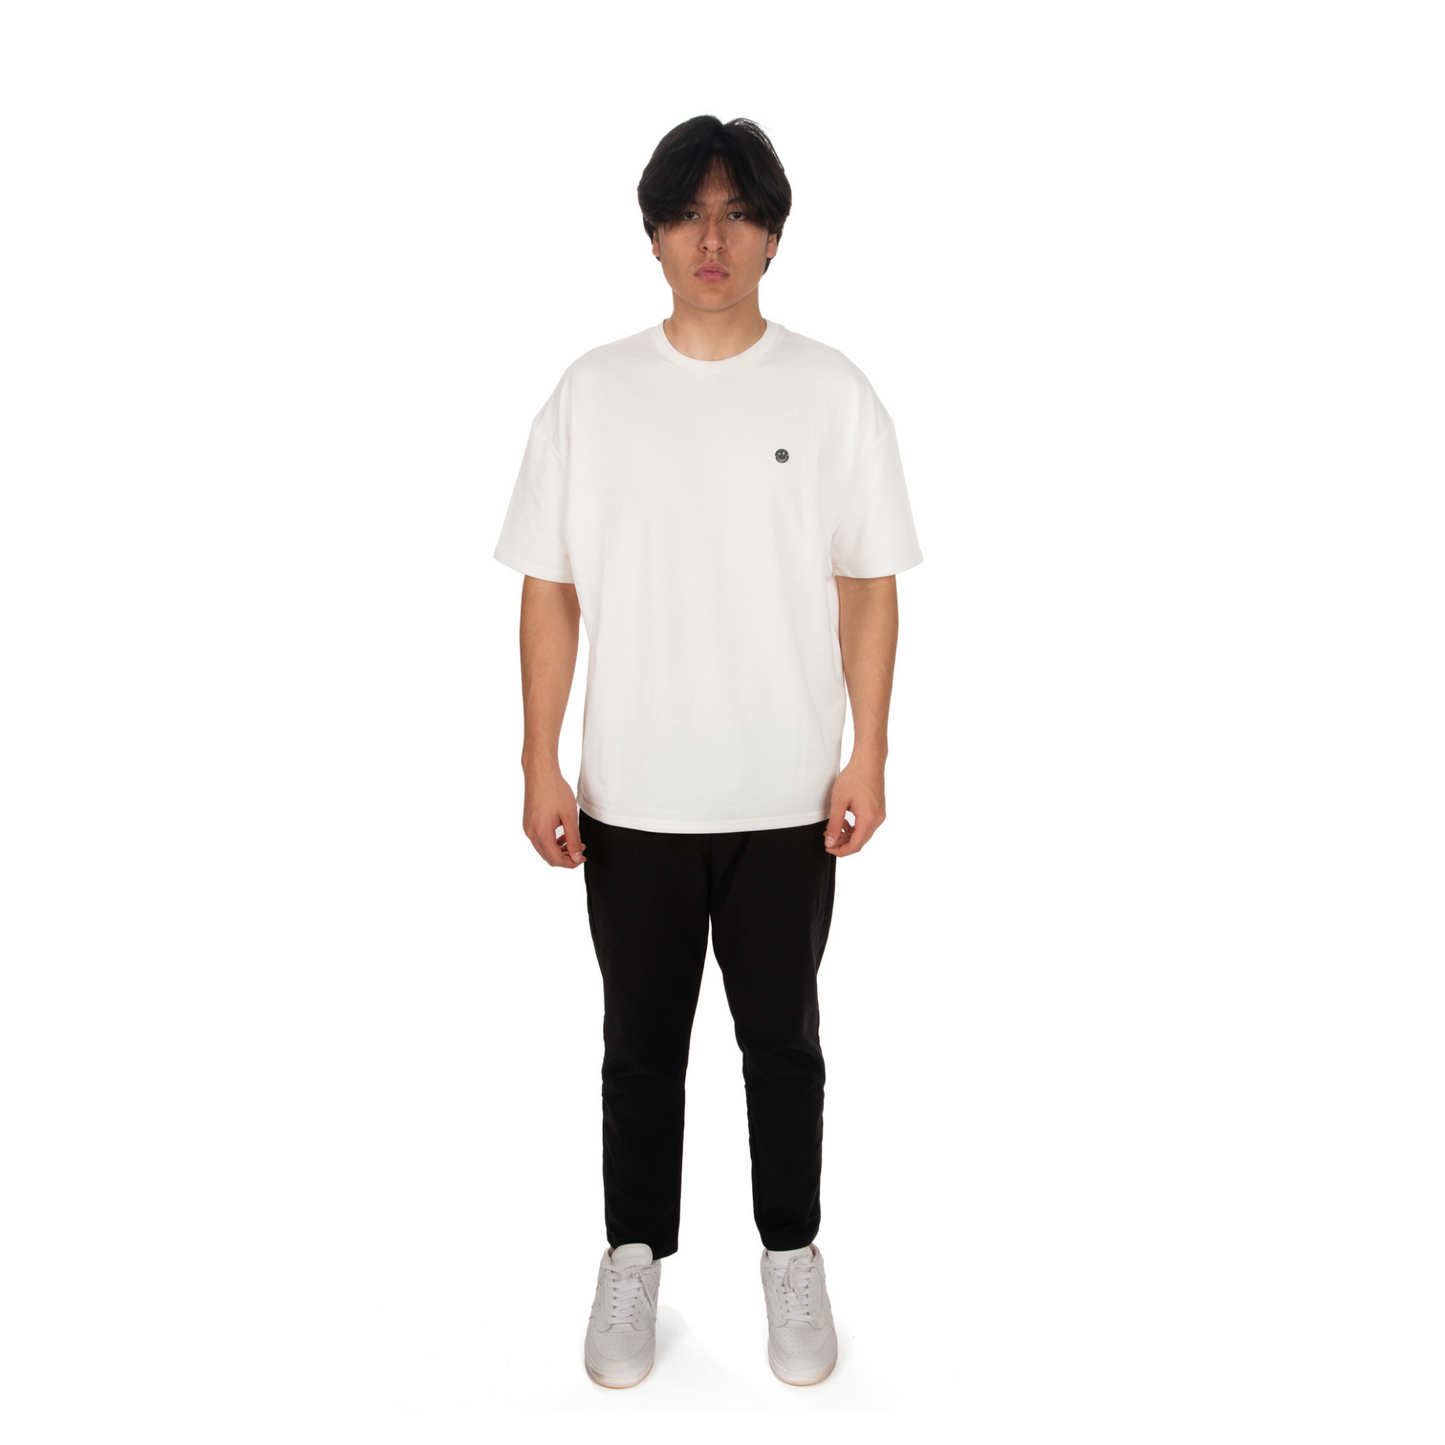 Unisex Oversized White T-shirt Le Club des Gamins front view on male model